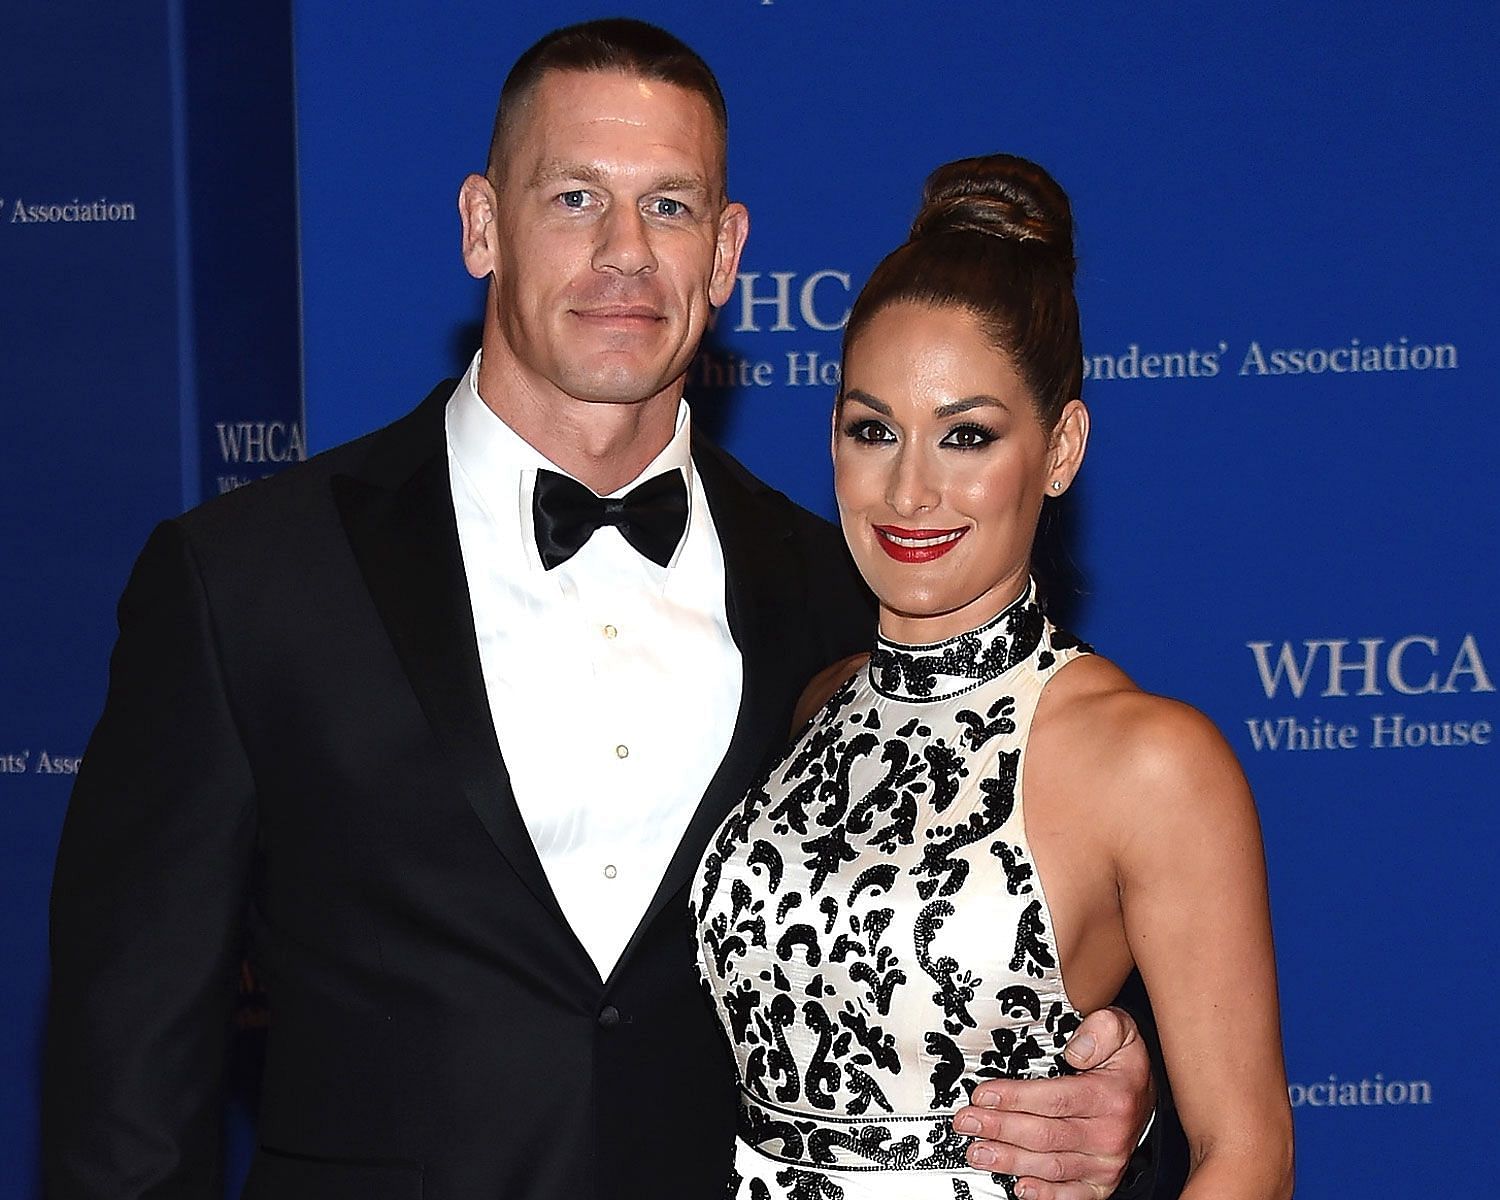 John Cena and Nikki Bella dated for six years before splitting in 2018